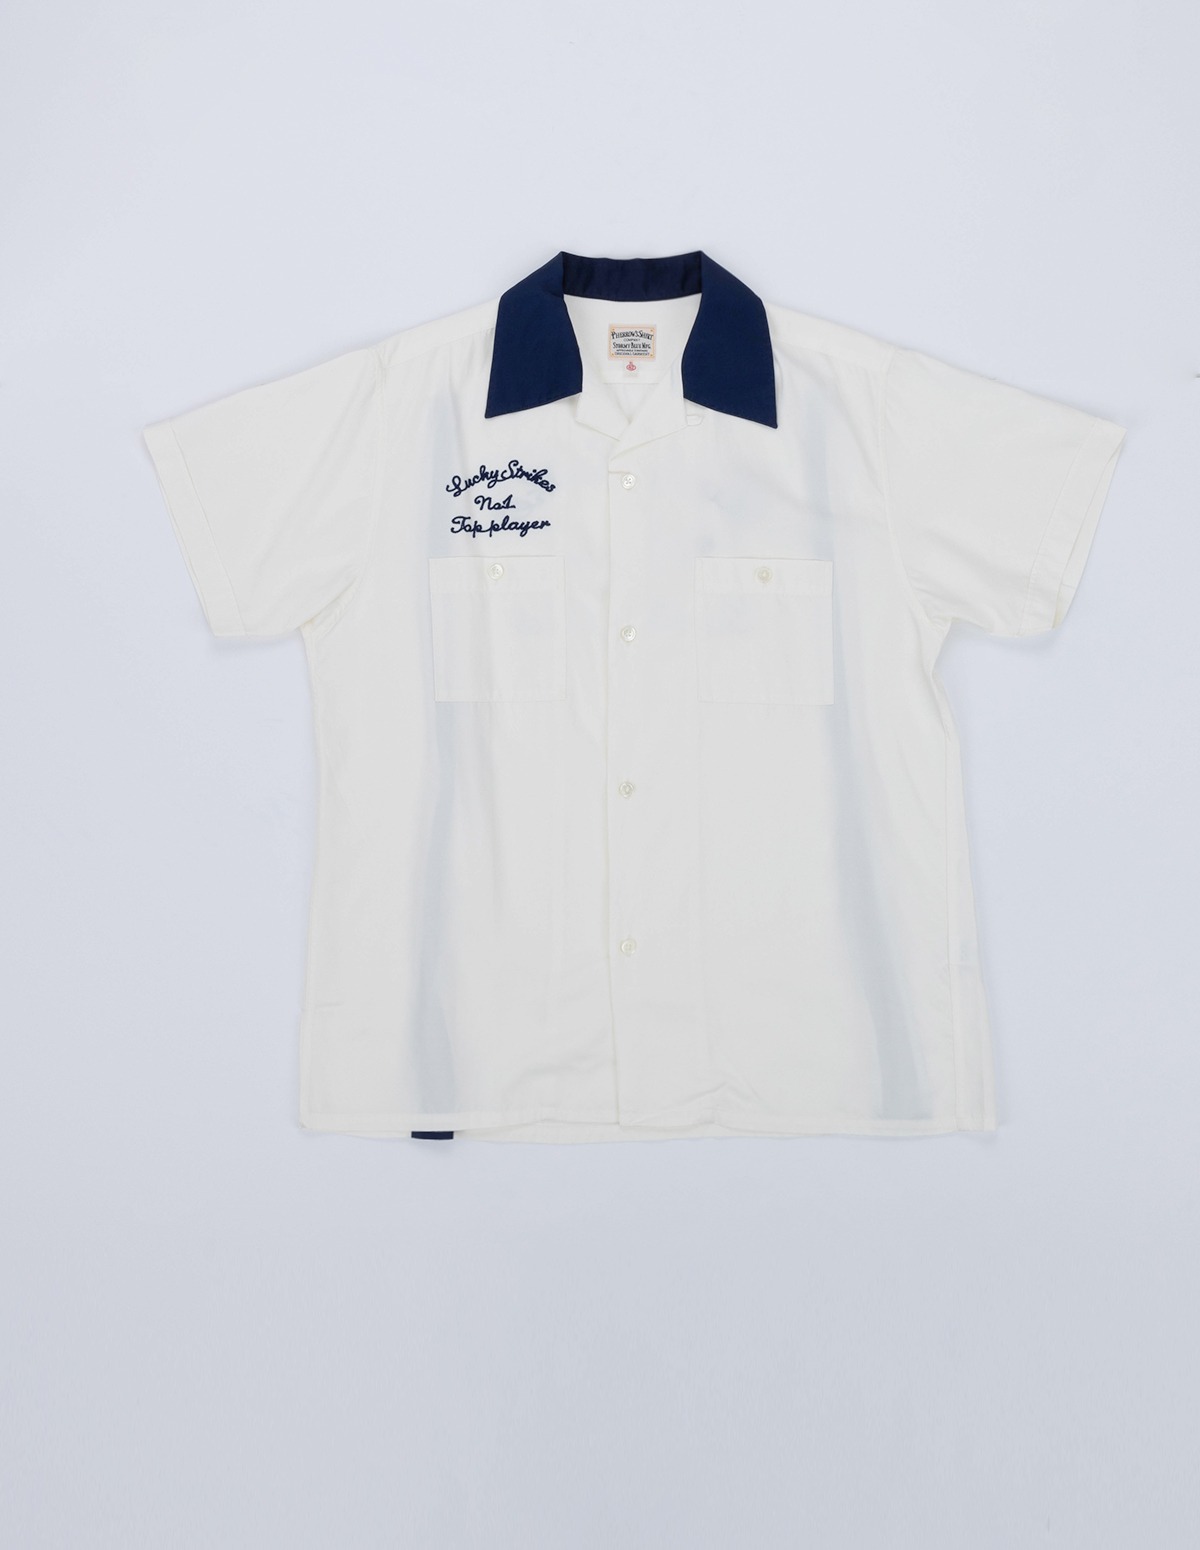 23S-PBS1 Lucky Strikes Bowling Shirts (Offwhite)